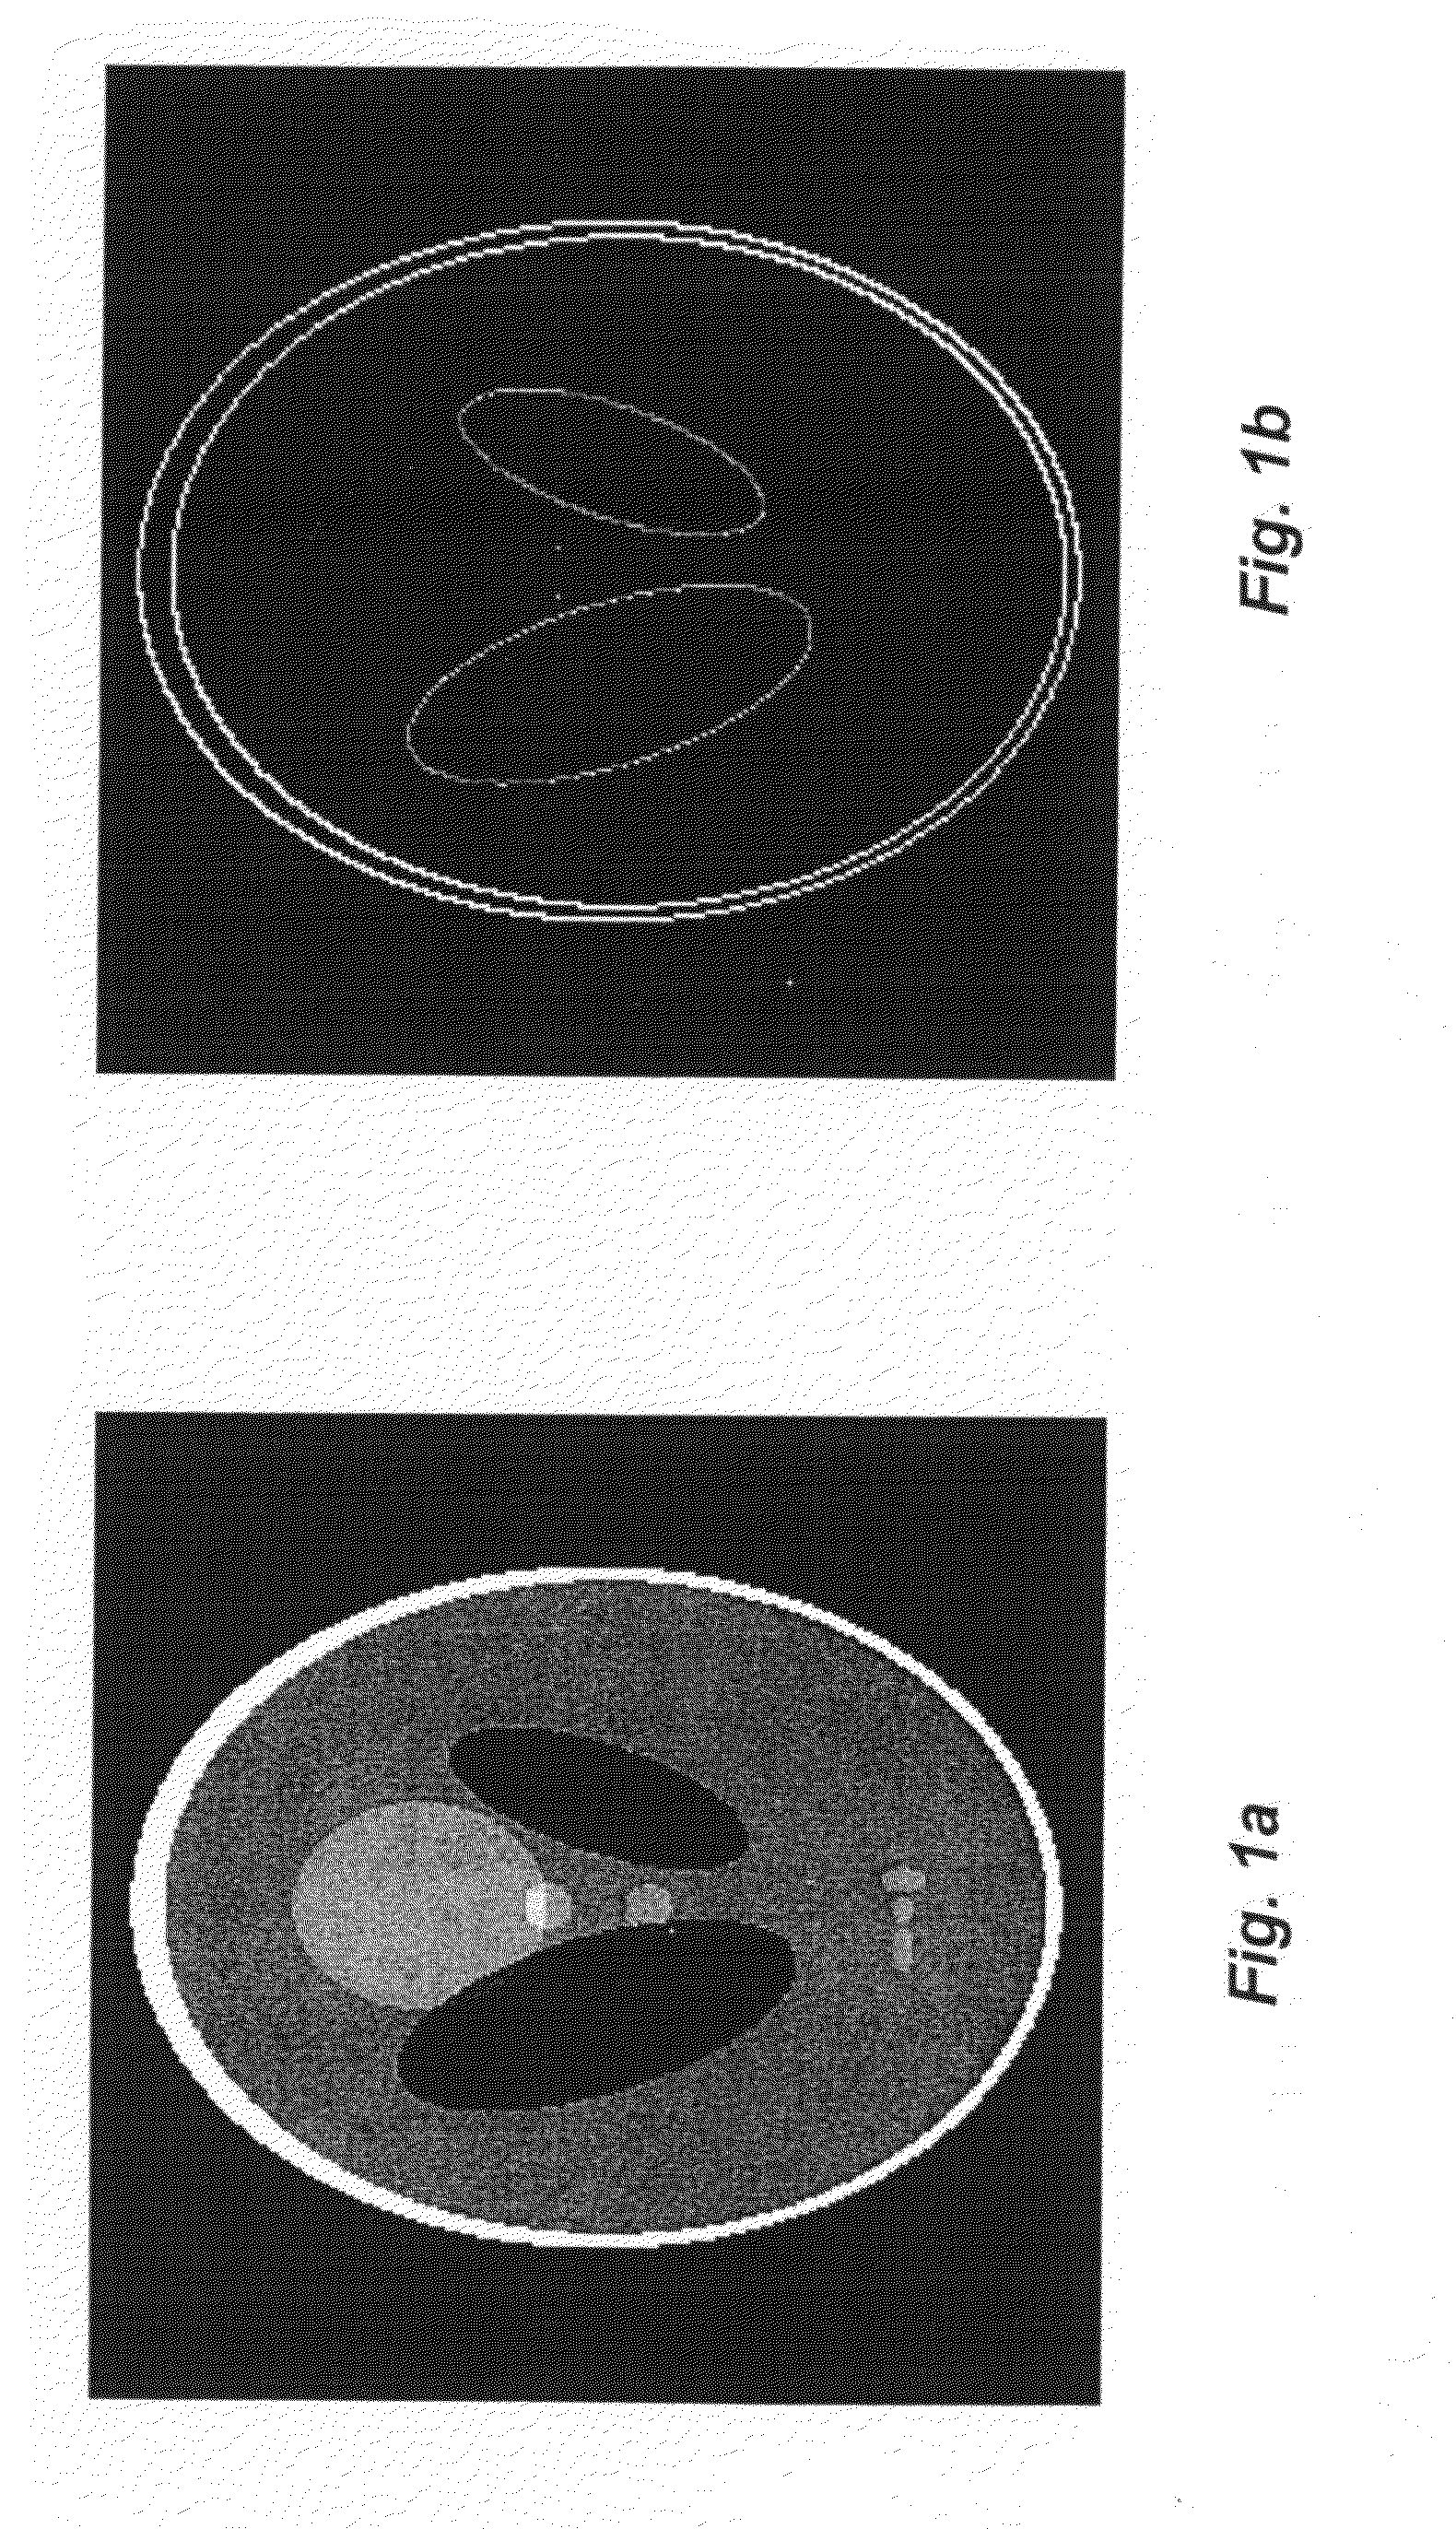 Image Reconstruction From Limited or Incomplete Data